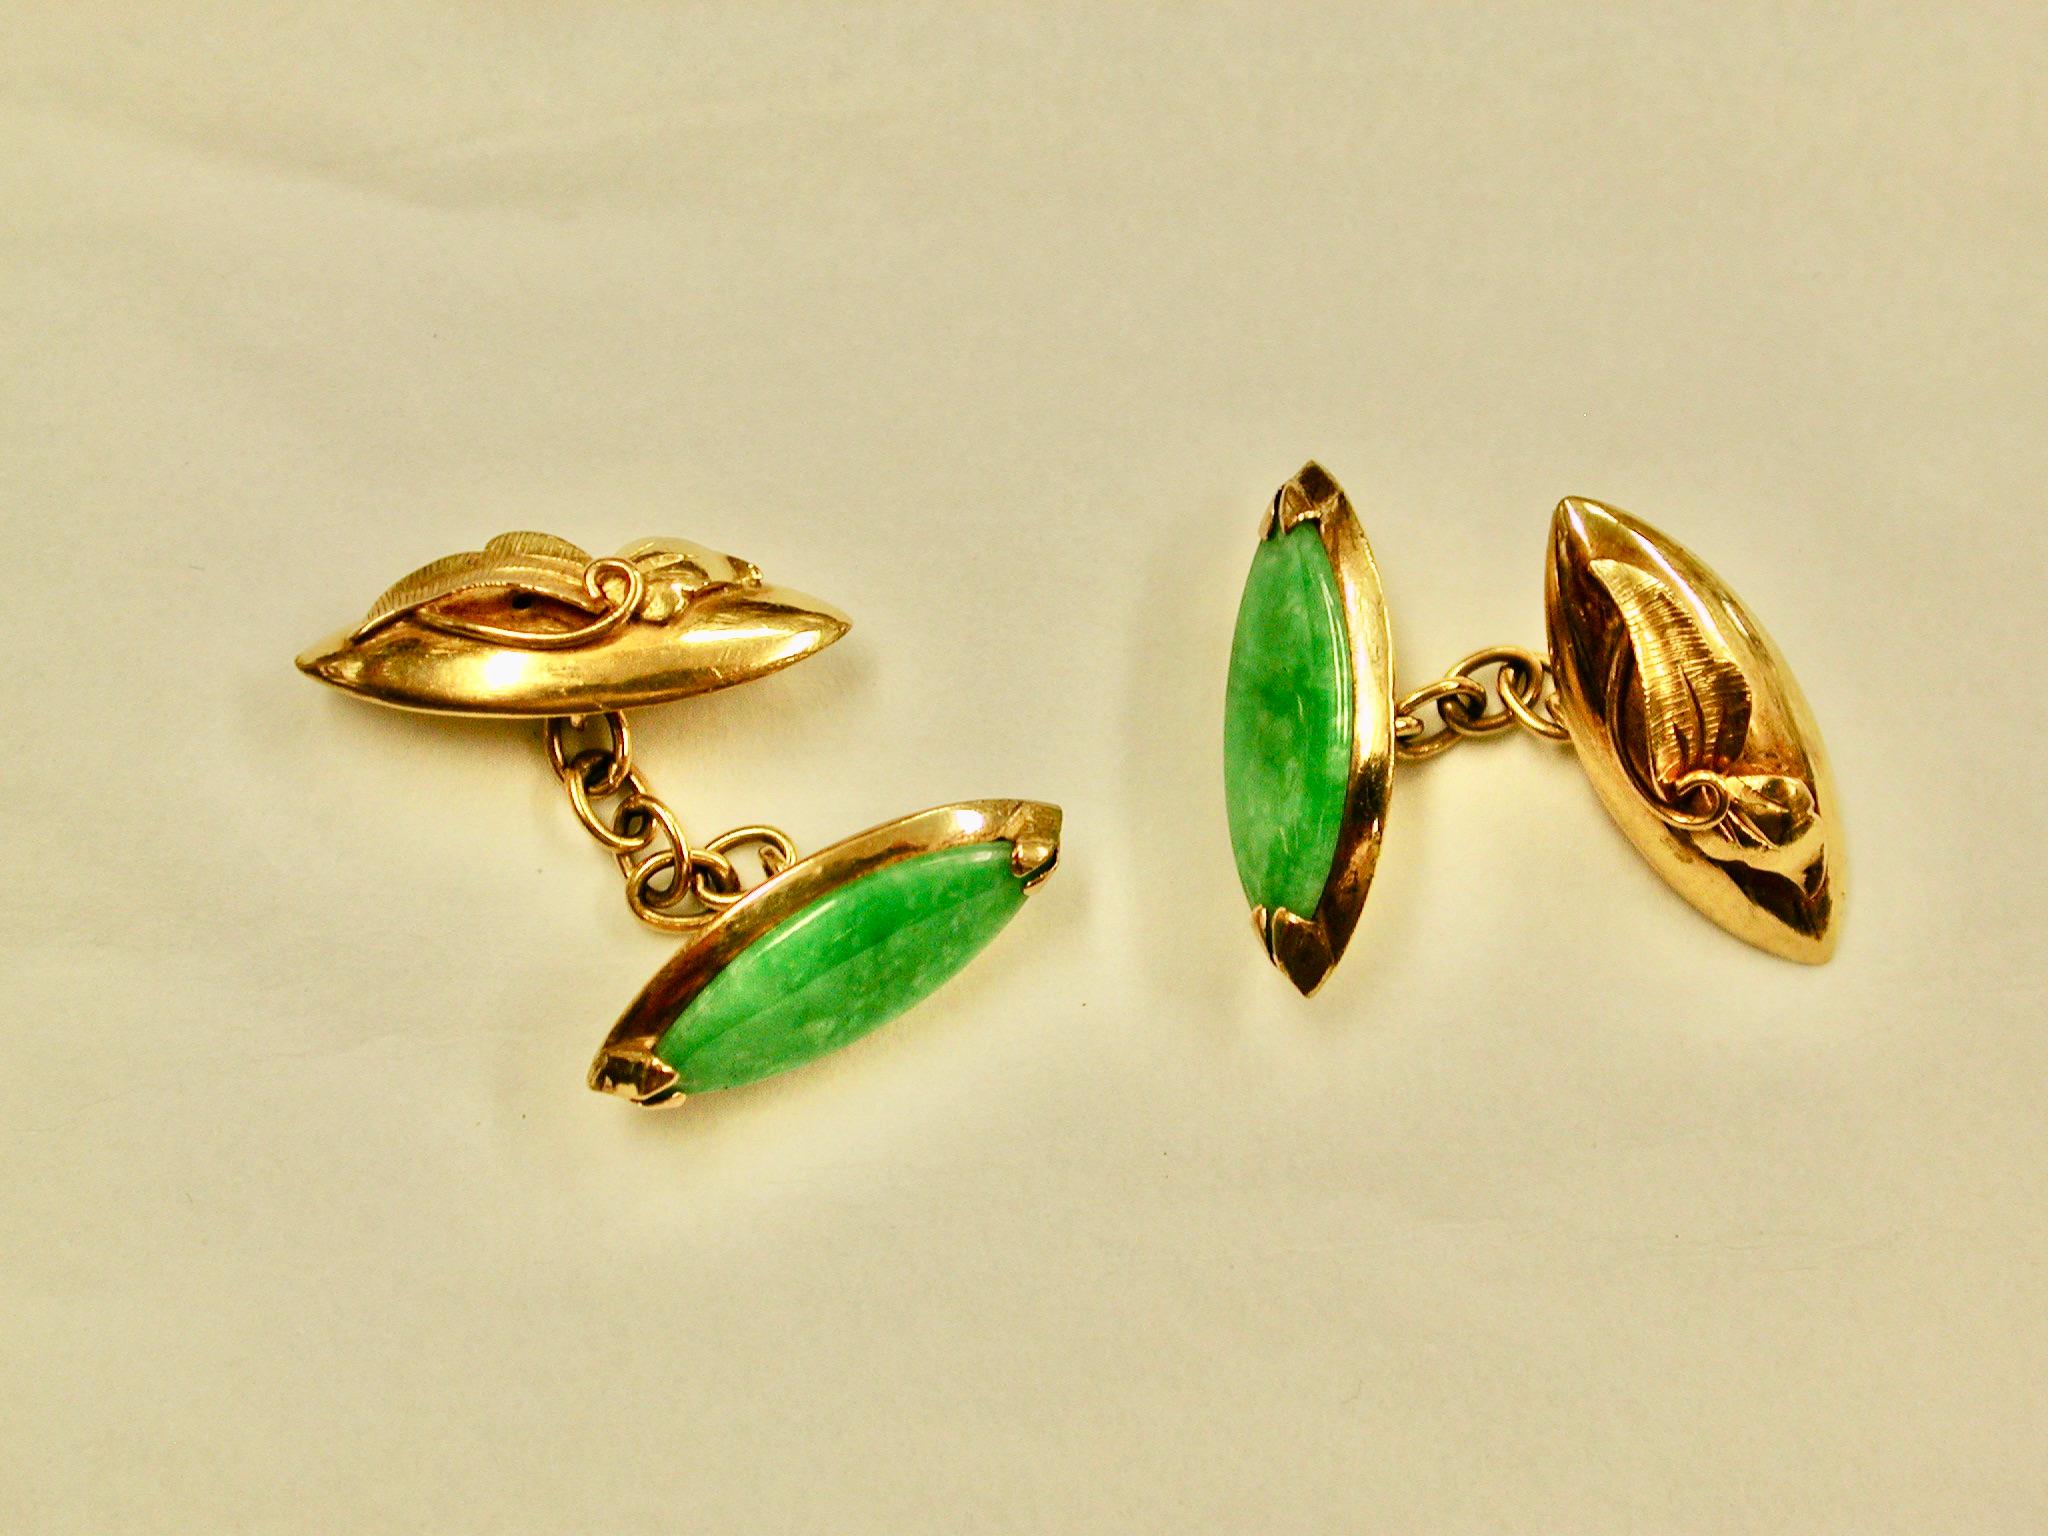 Pair Of 18Ct Gold & Jade Cufflinks Made In Hong Kong Circa 1920
Lovely quality jade with nice oriental leafwork.